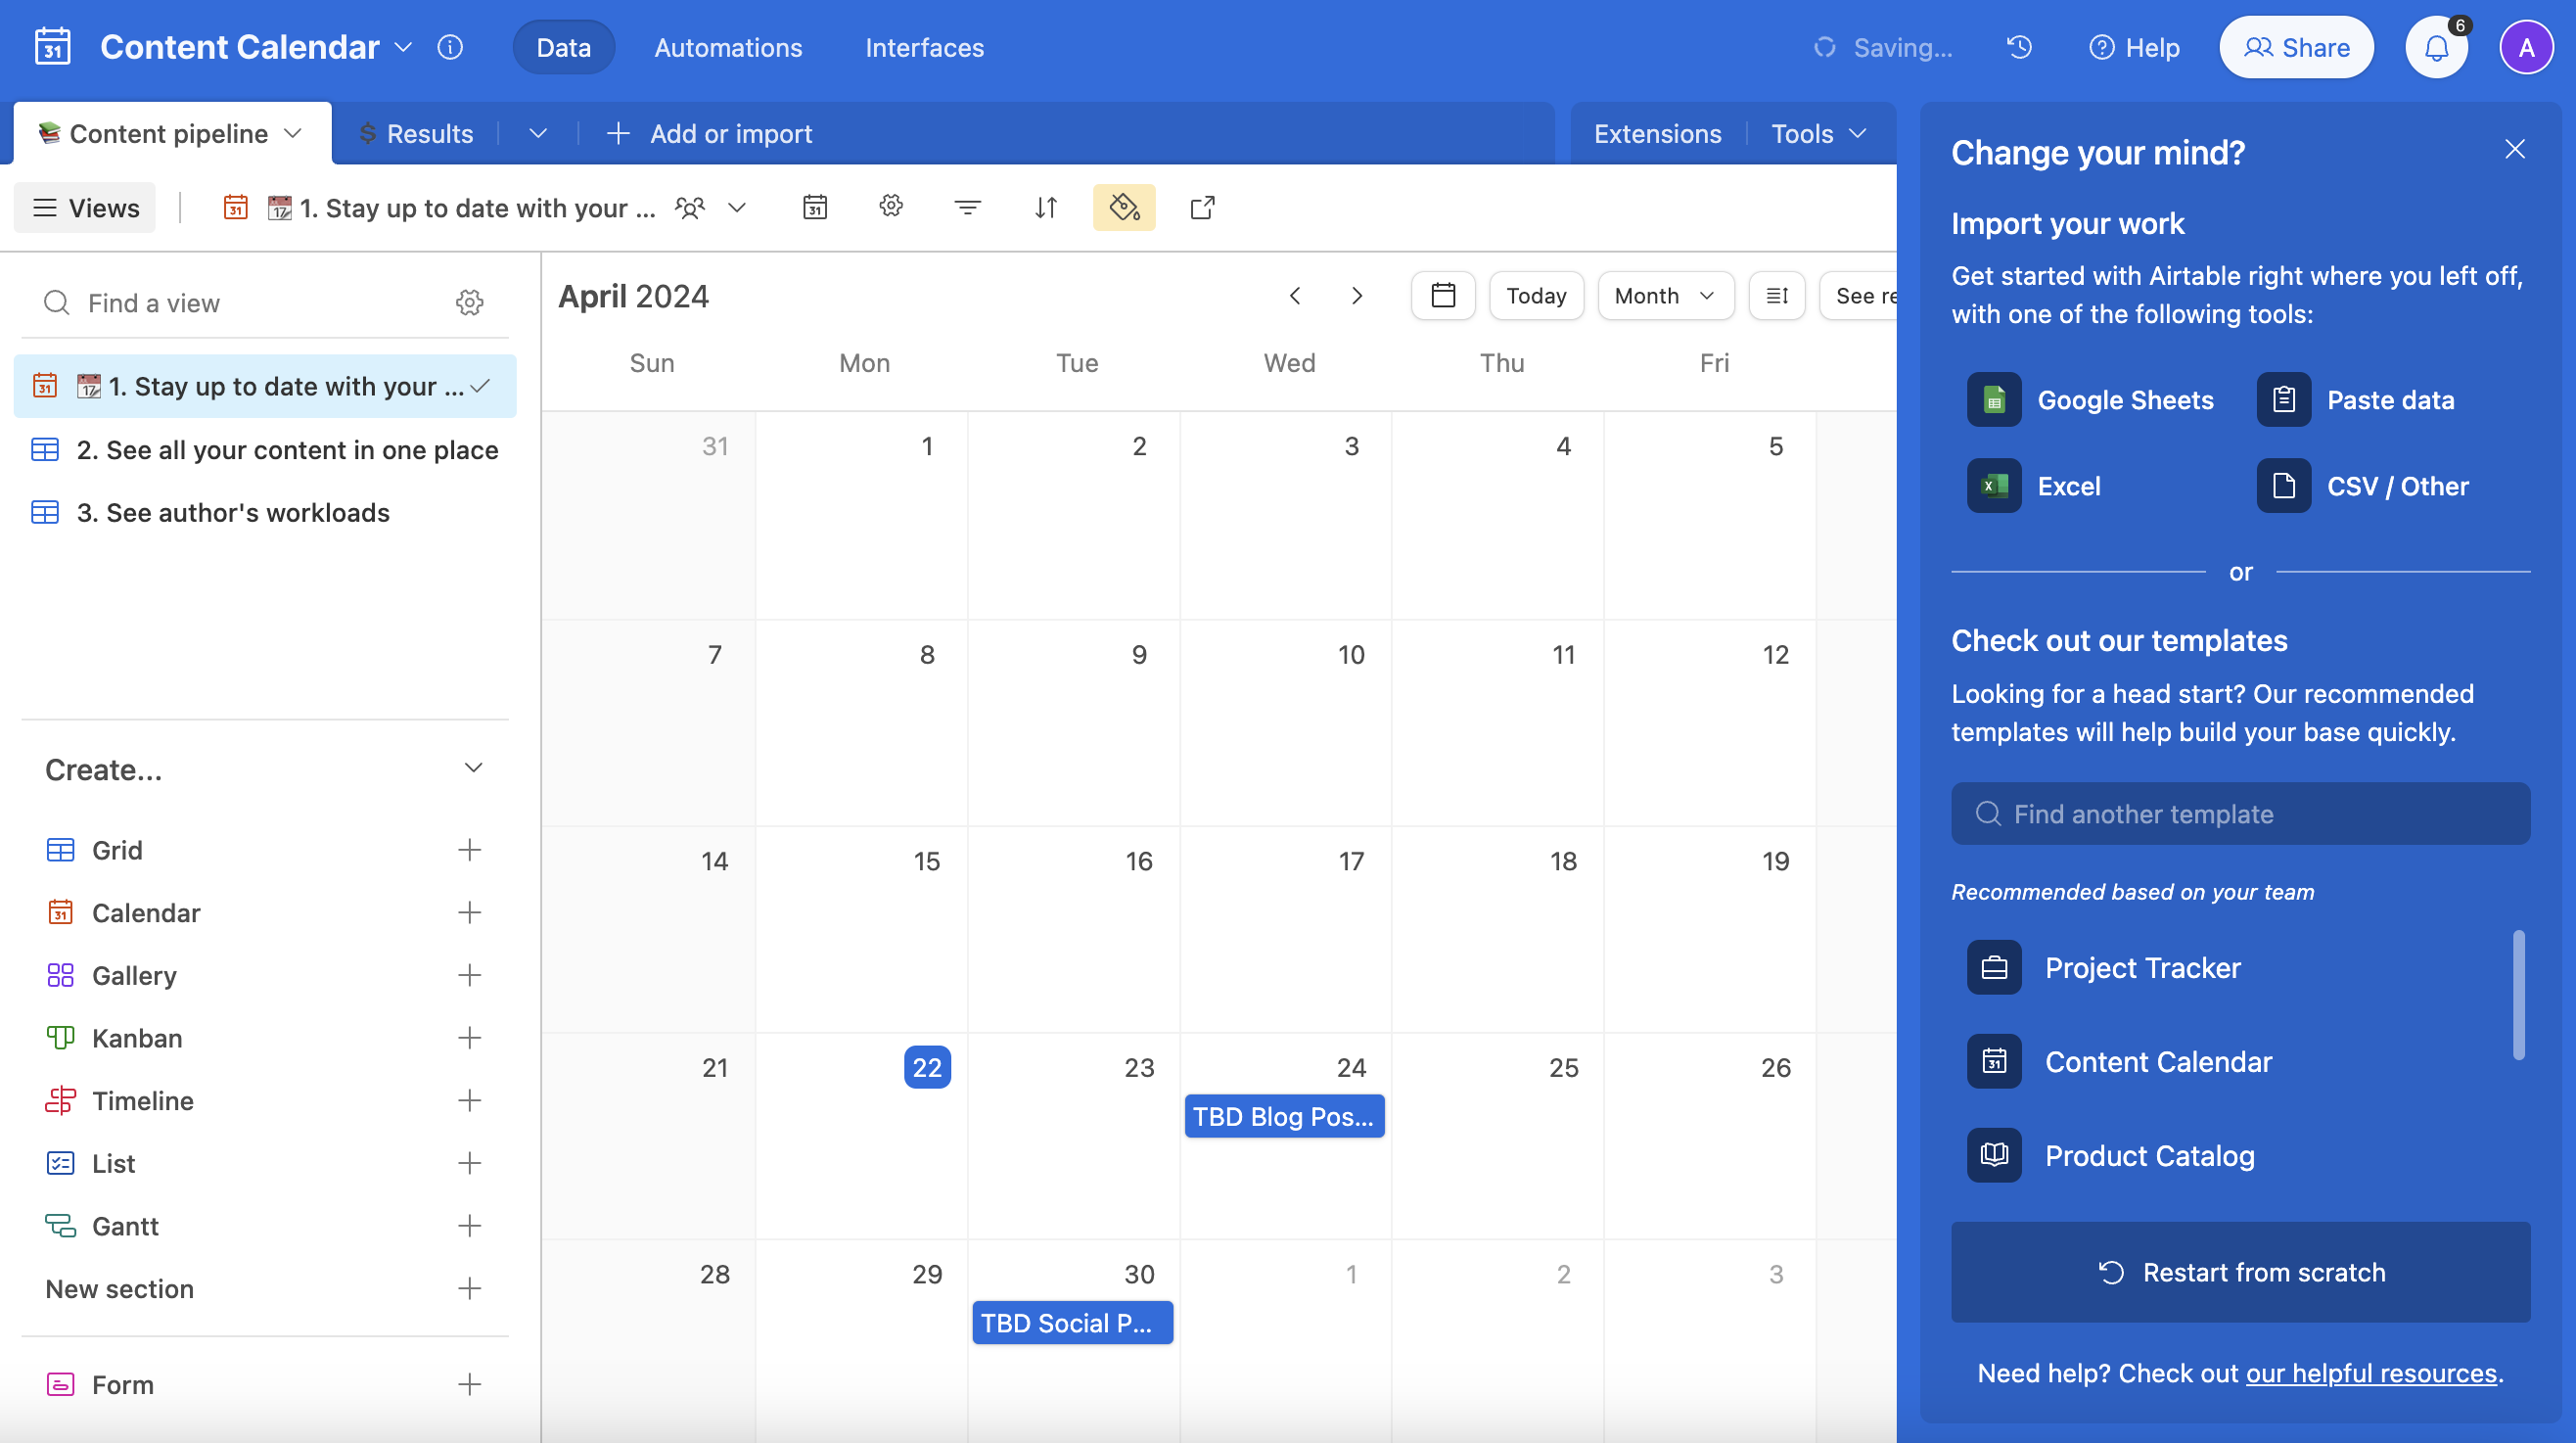 A screenshot displaying an Airtable content calendar interface with content calendar templates for 2024, days of April highlighted, and a task titled "tbd blog post" scheduled for April 29th. Various sidebar